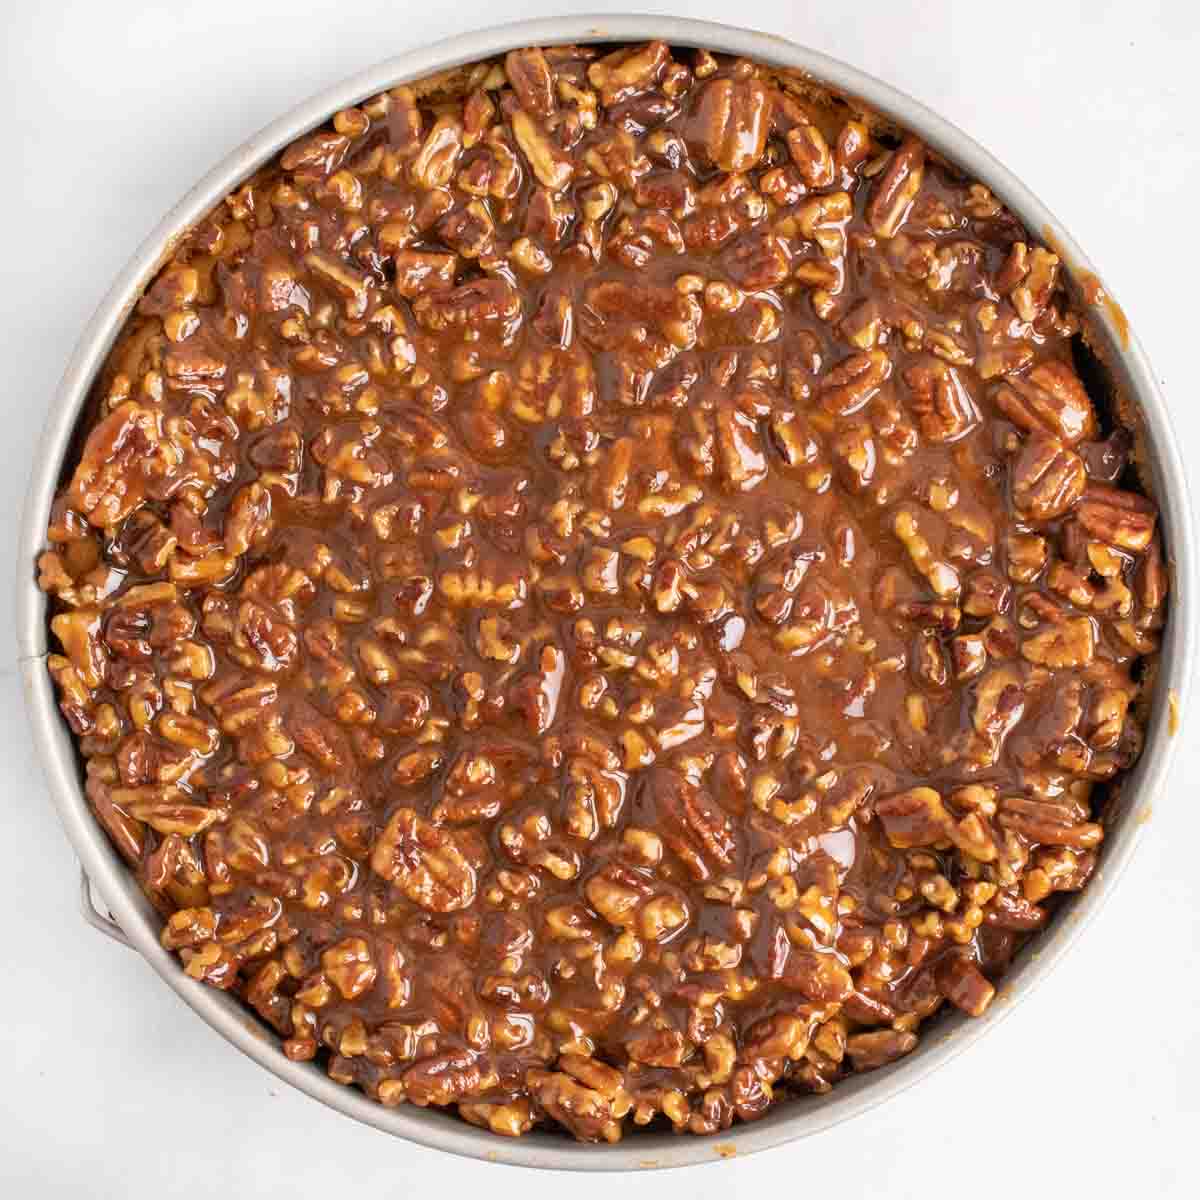 praline topping on cheesecake in pan